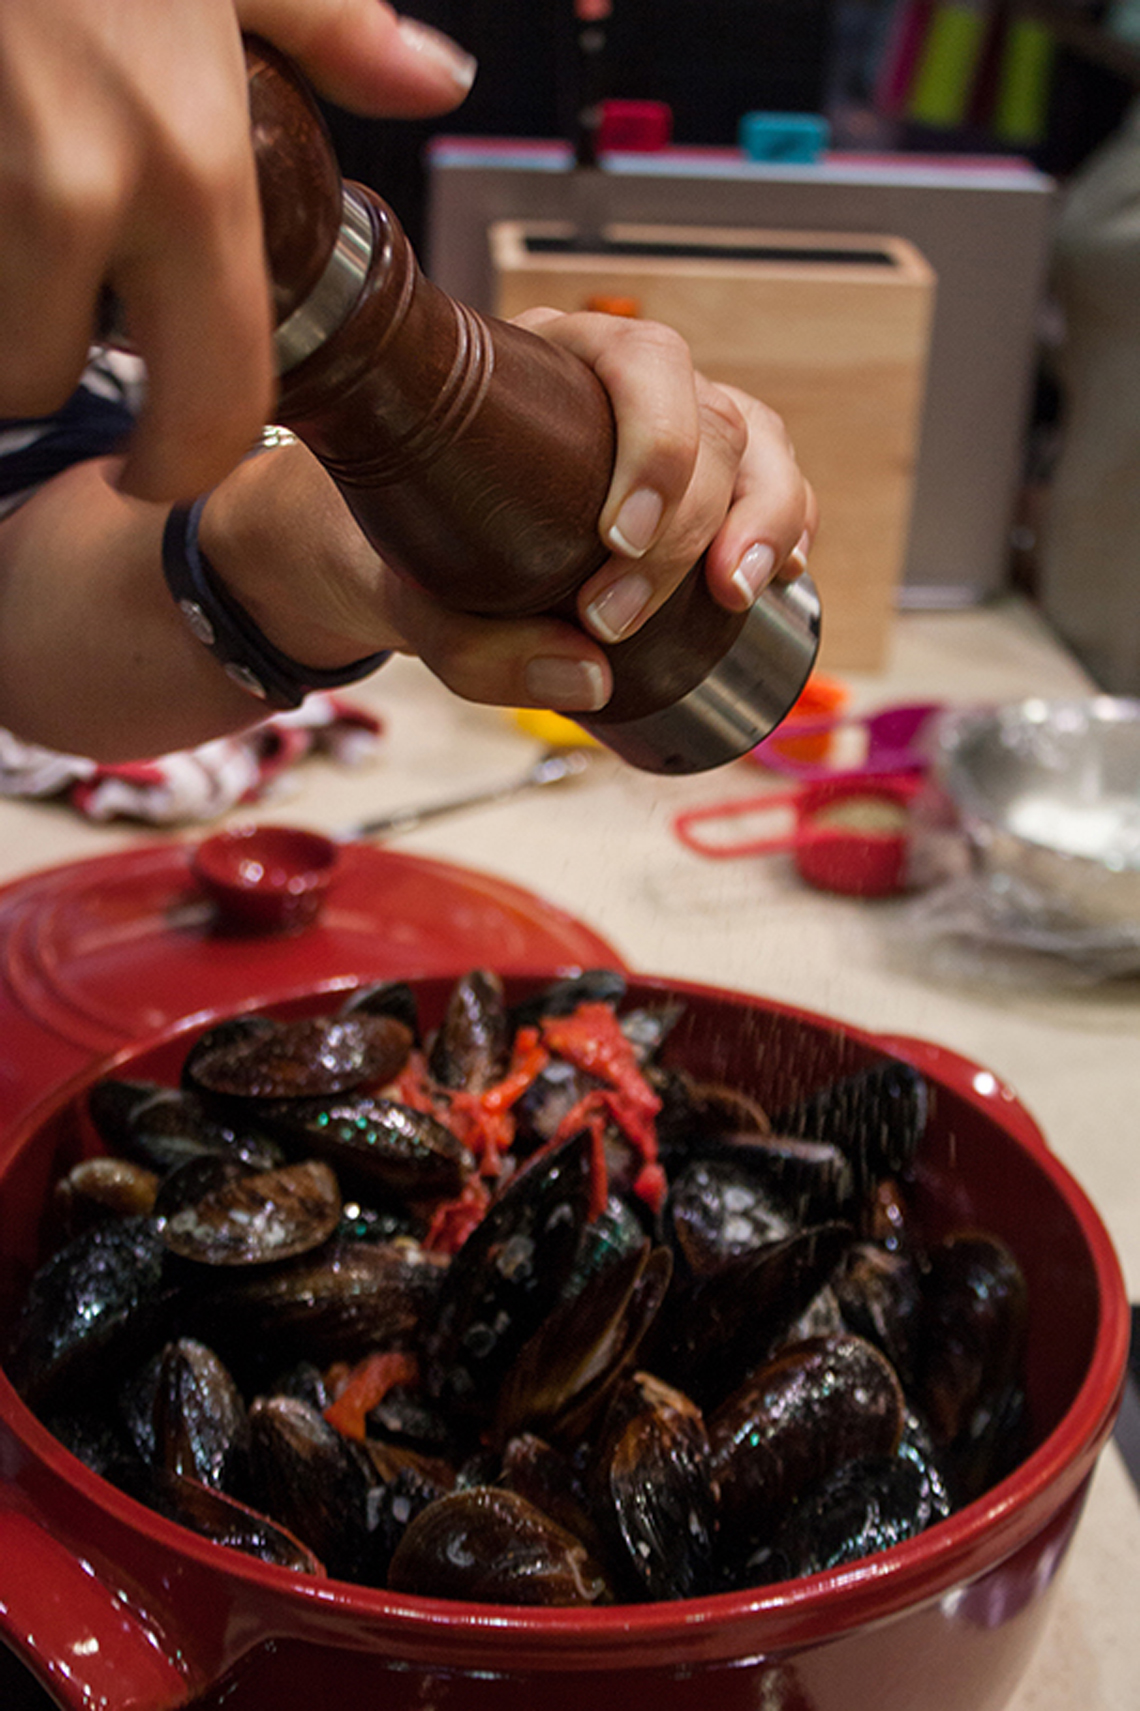 Cooking of mussels. Lesson "Locavore". Cooking class in “My Friends” cooking school.